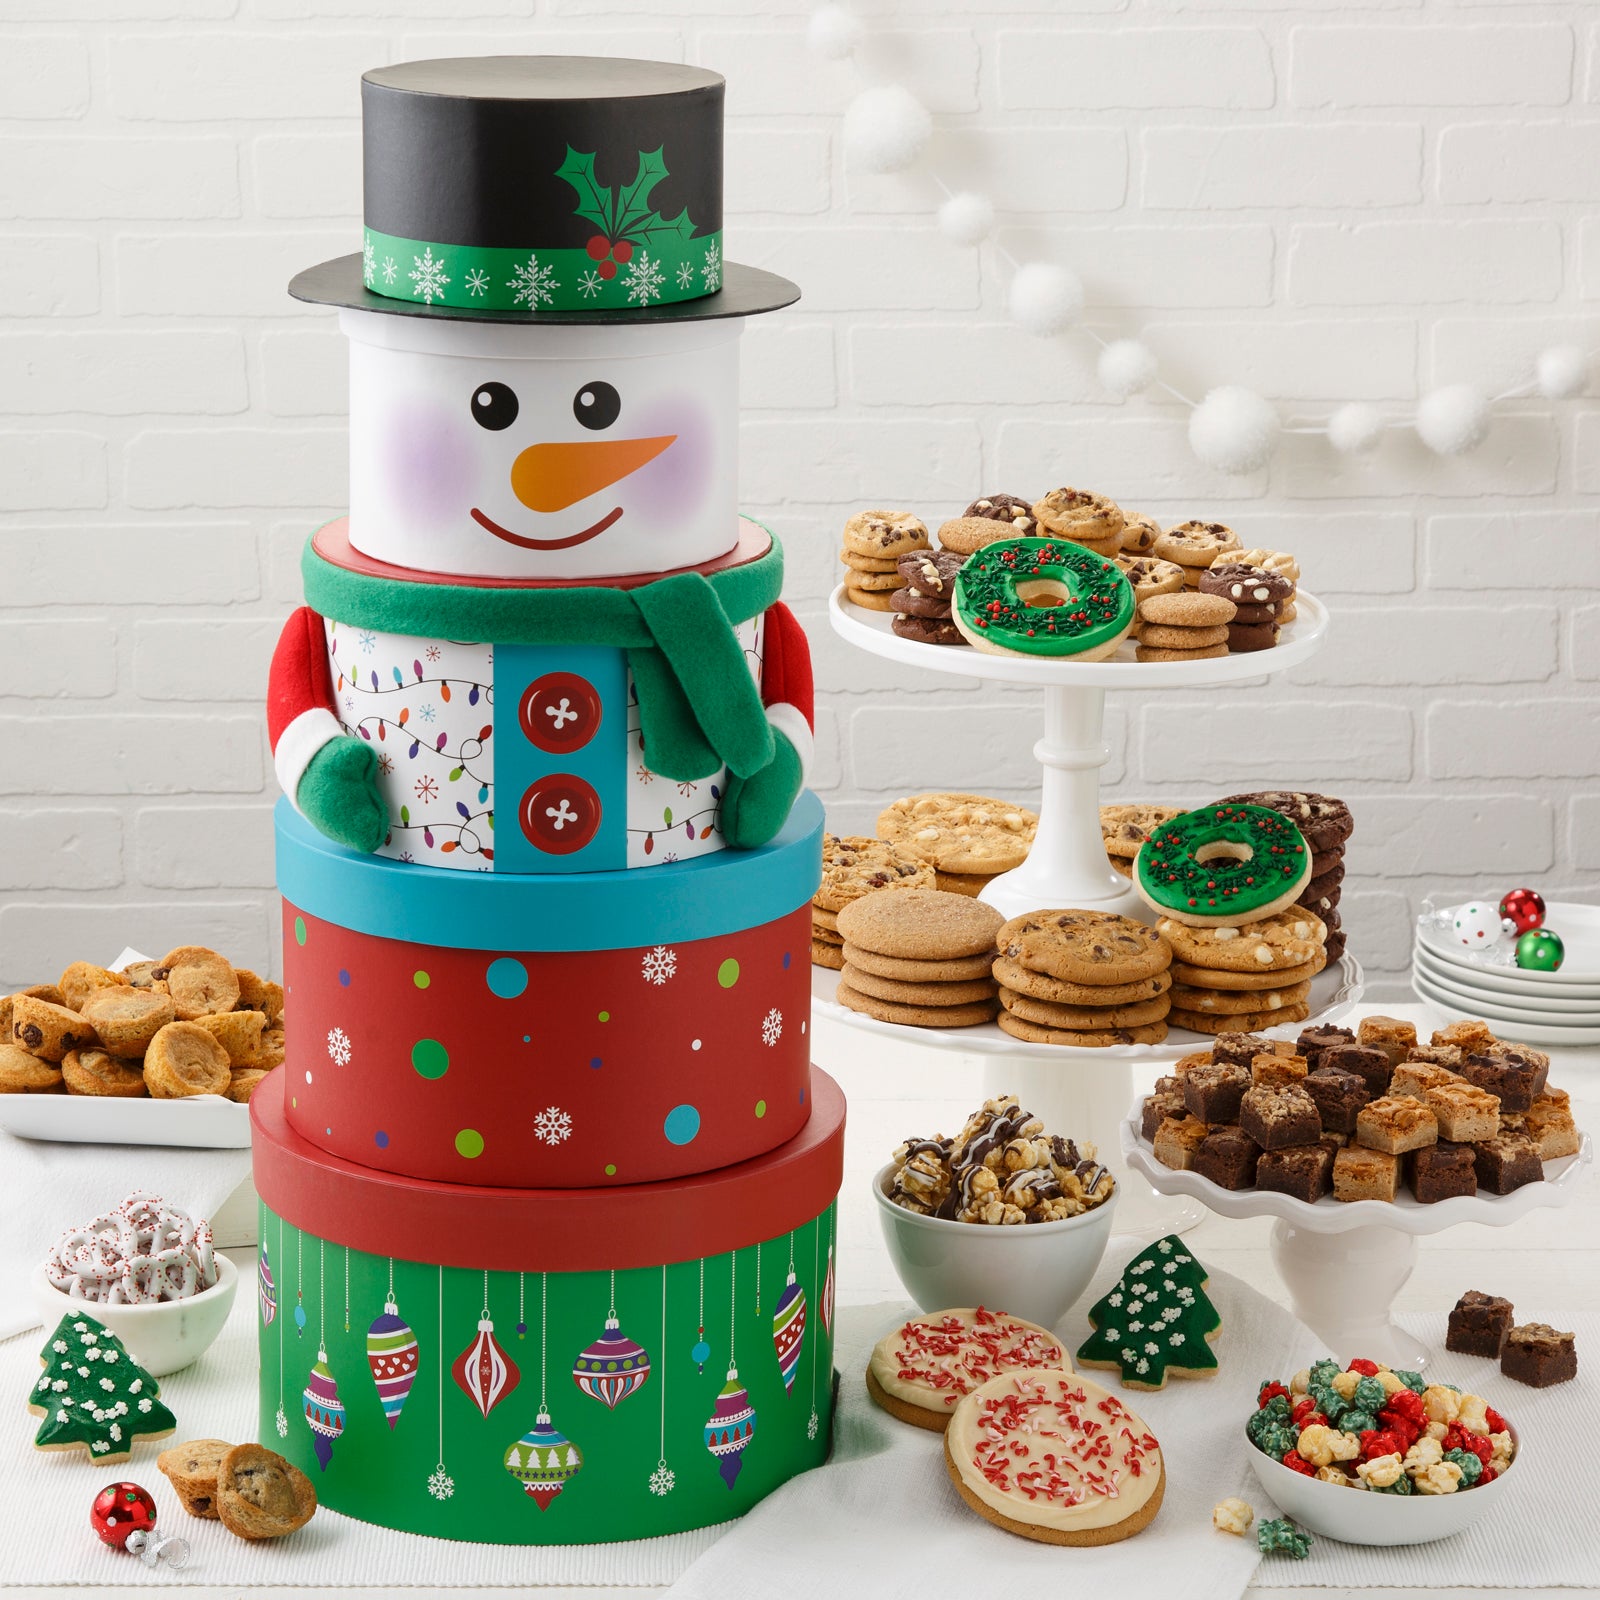 A five-tier snowman tower surrounded by an assortment of Nibblers®, original cookies, muffins, brownie bites, holiday popcorn, chocolate drizzled popcorn, two frosted wreath cookies with sprinkles, two frosted peppermint cookies with sprinkles, two frosted Christmas tree cookies with sprinkles, and yogurt-covered pretzels.